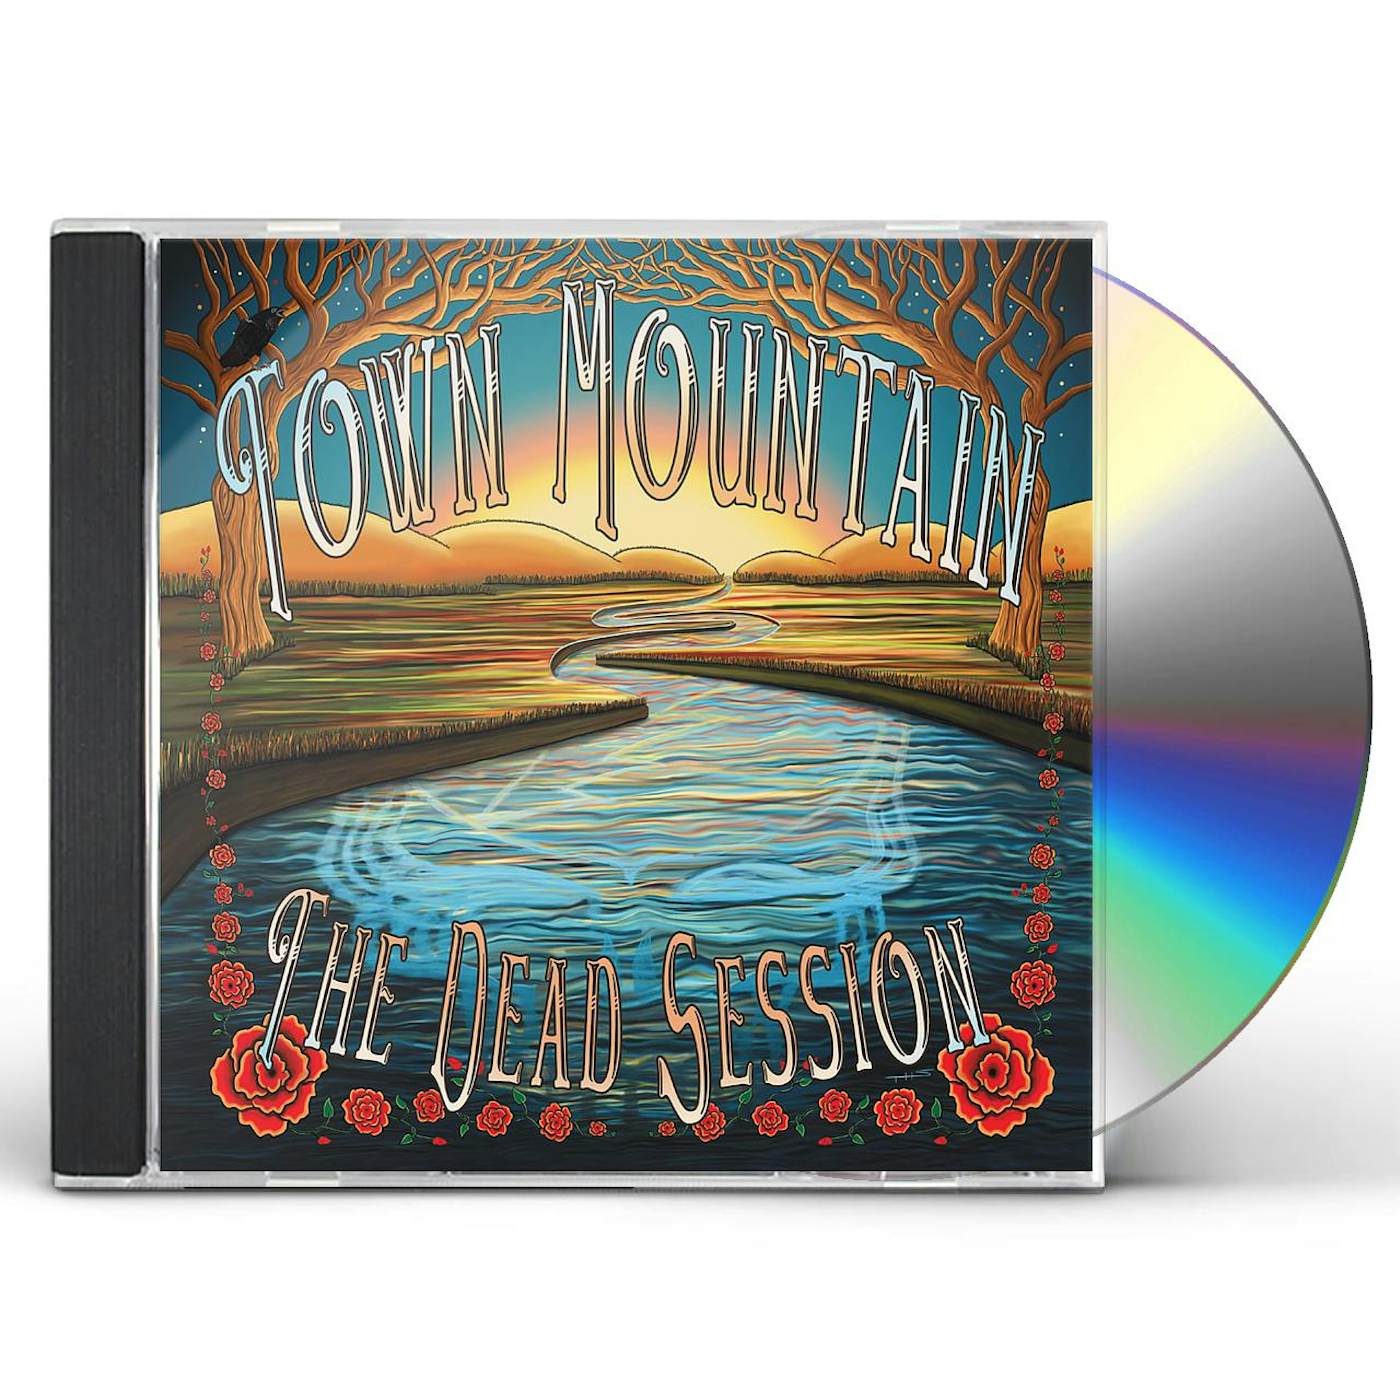 Town Mountain Dead Session CD